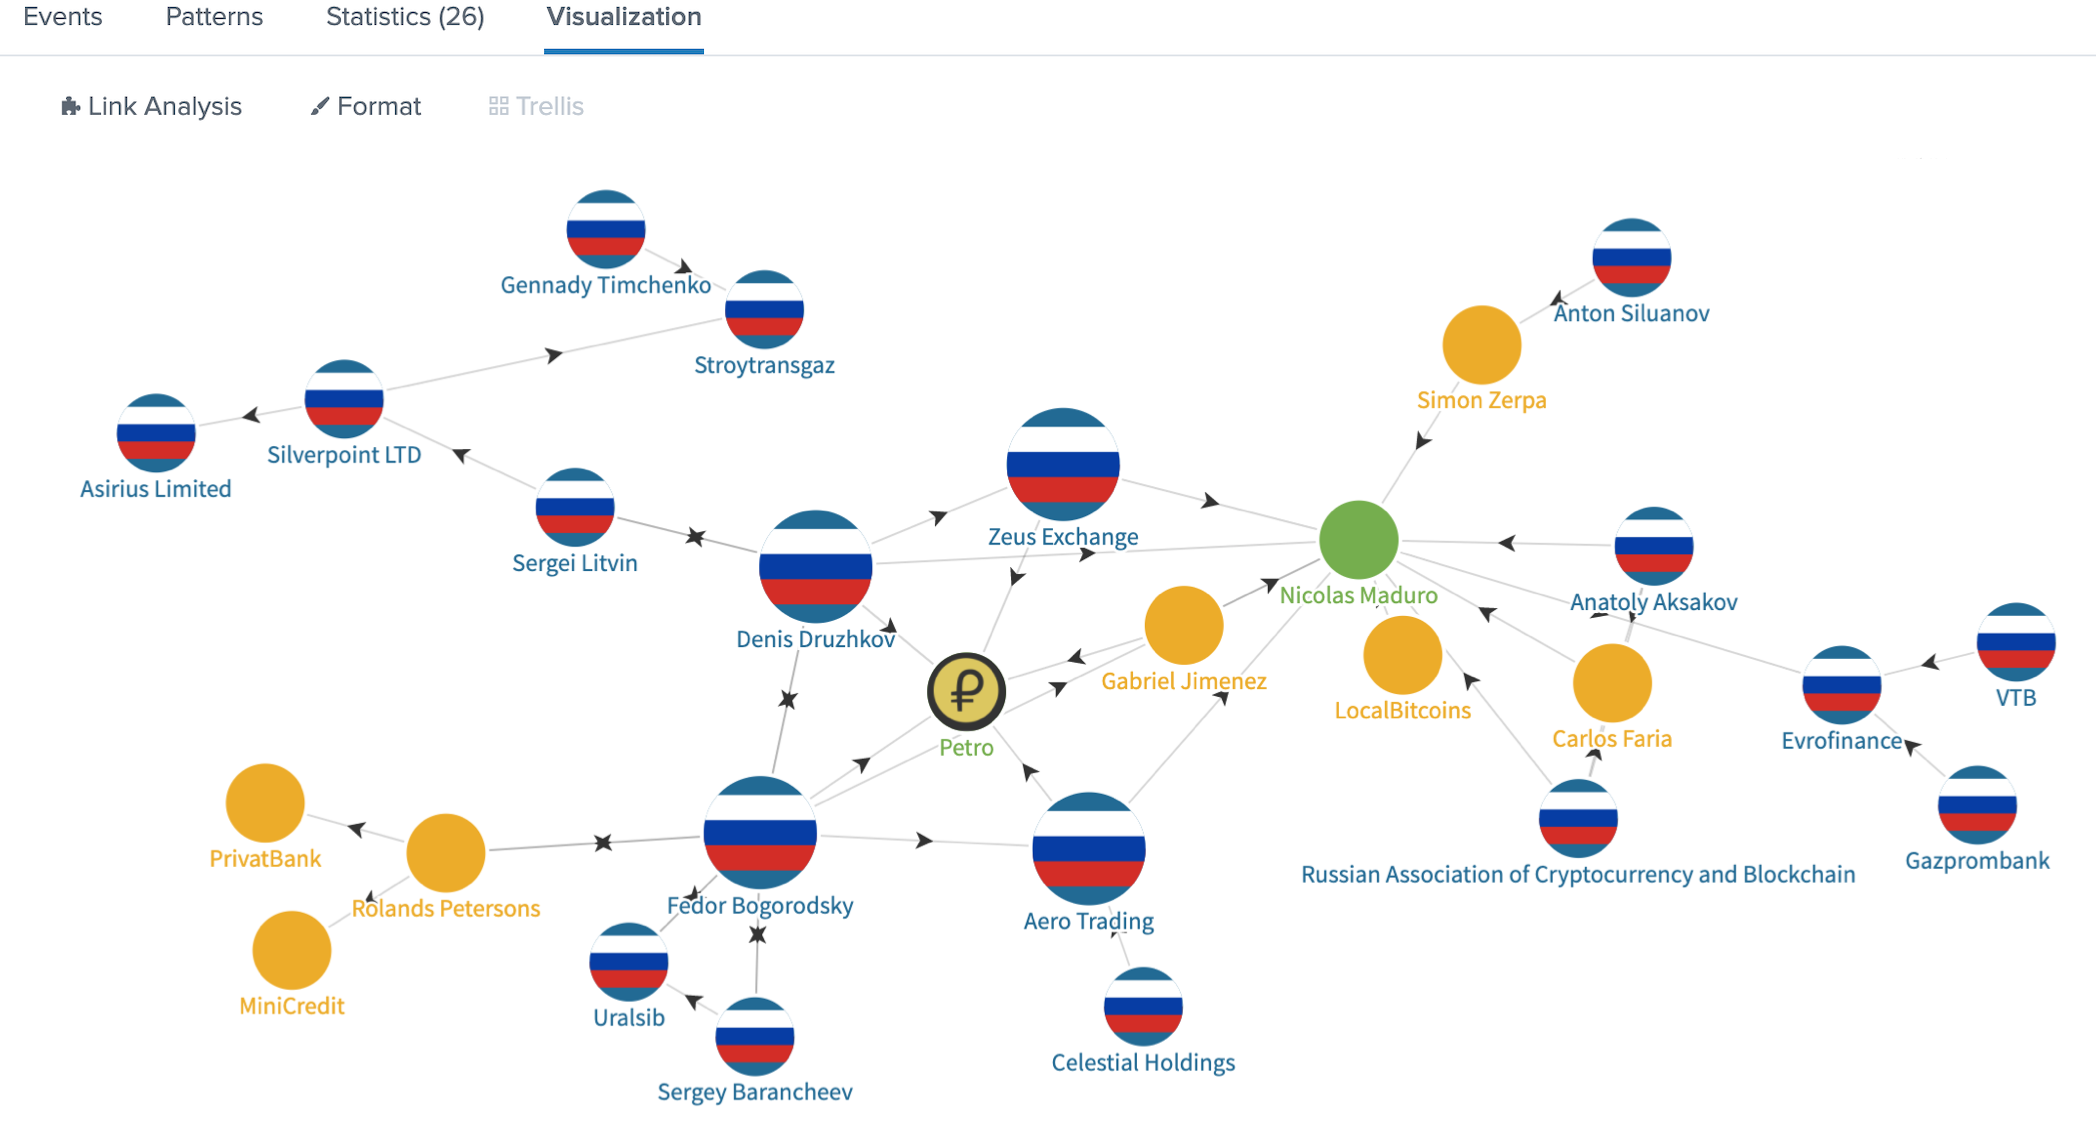 Entities connected with Venezuelan Petro. Source: <a href="https://inca.digital/products#data">Inca Digital</a>